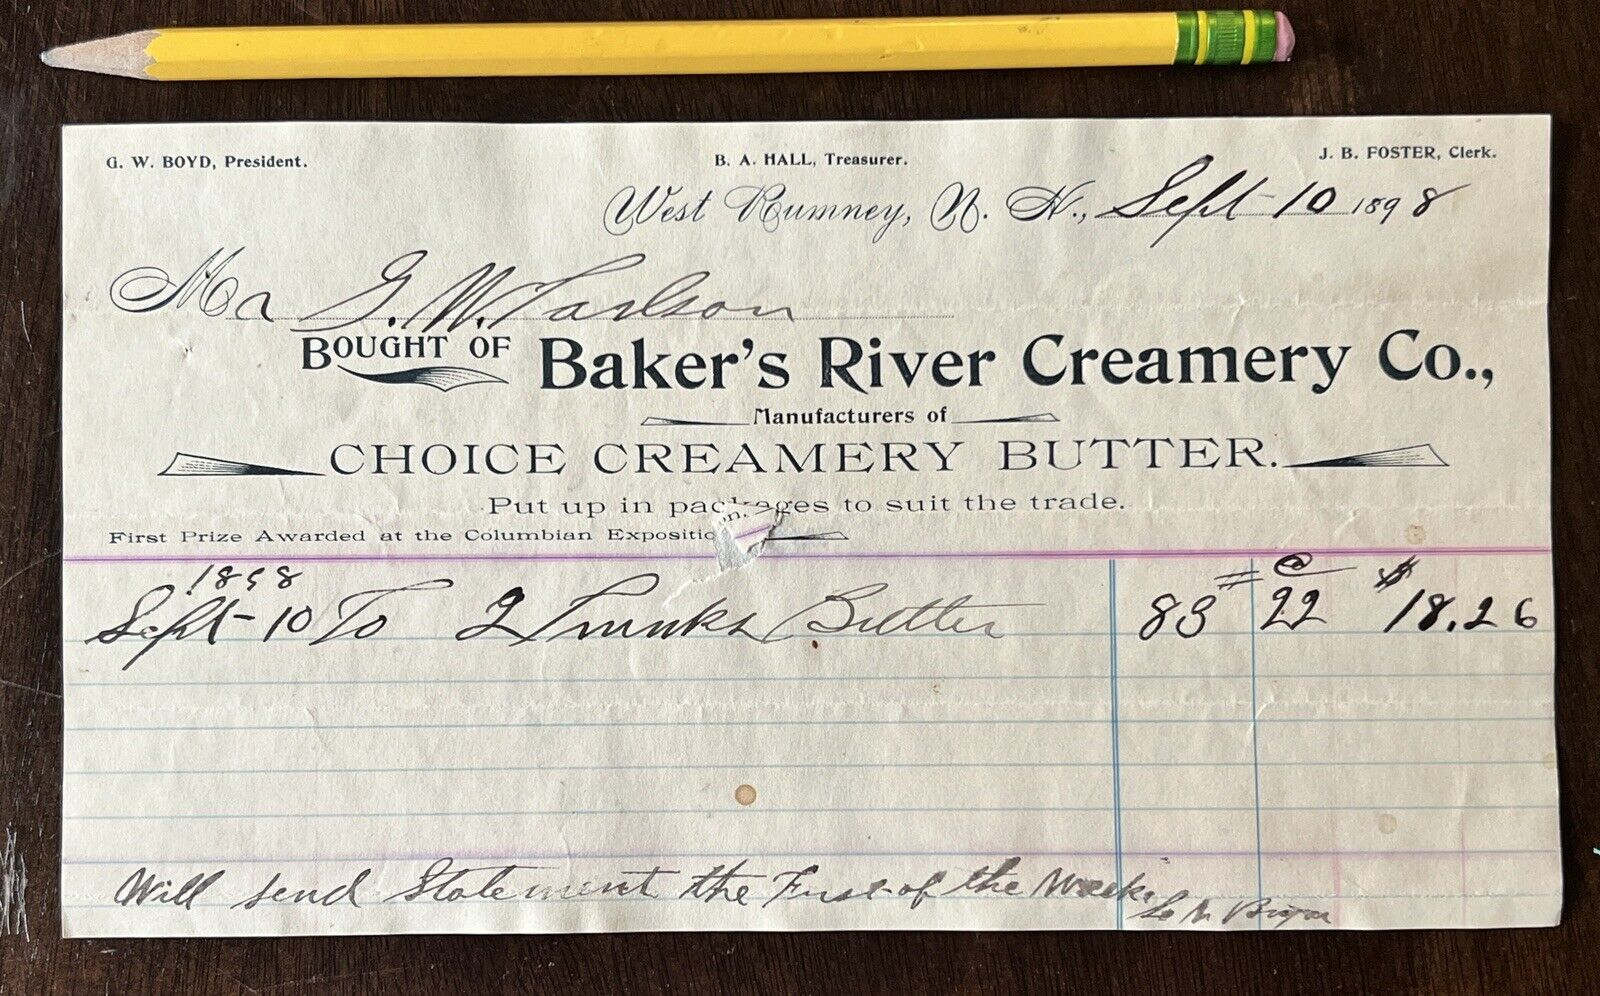 1898 WEST RUMNEY NH NEW HAMPSHIRE BAKER\'S RIVER CREAMERY CO. INVOICE RECEIPT